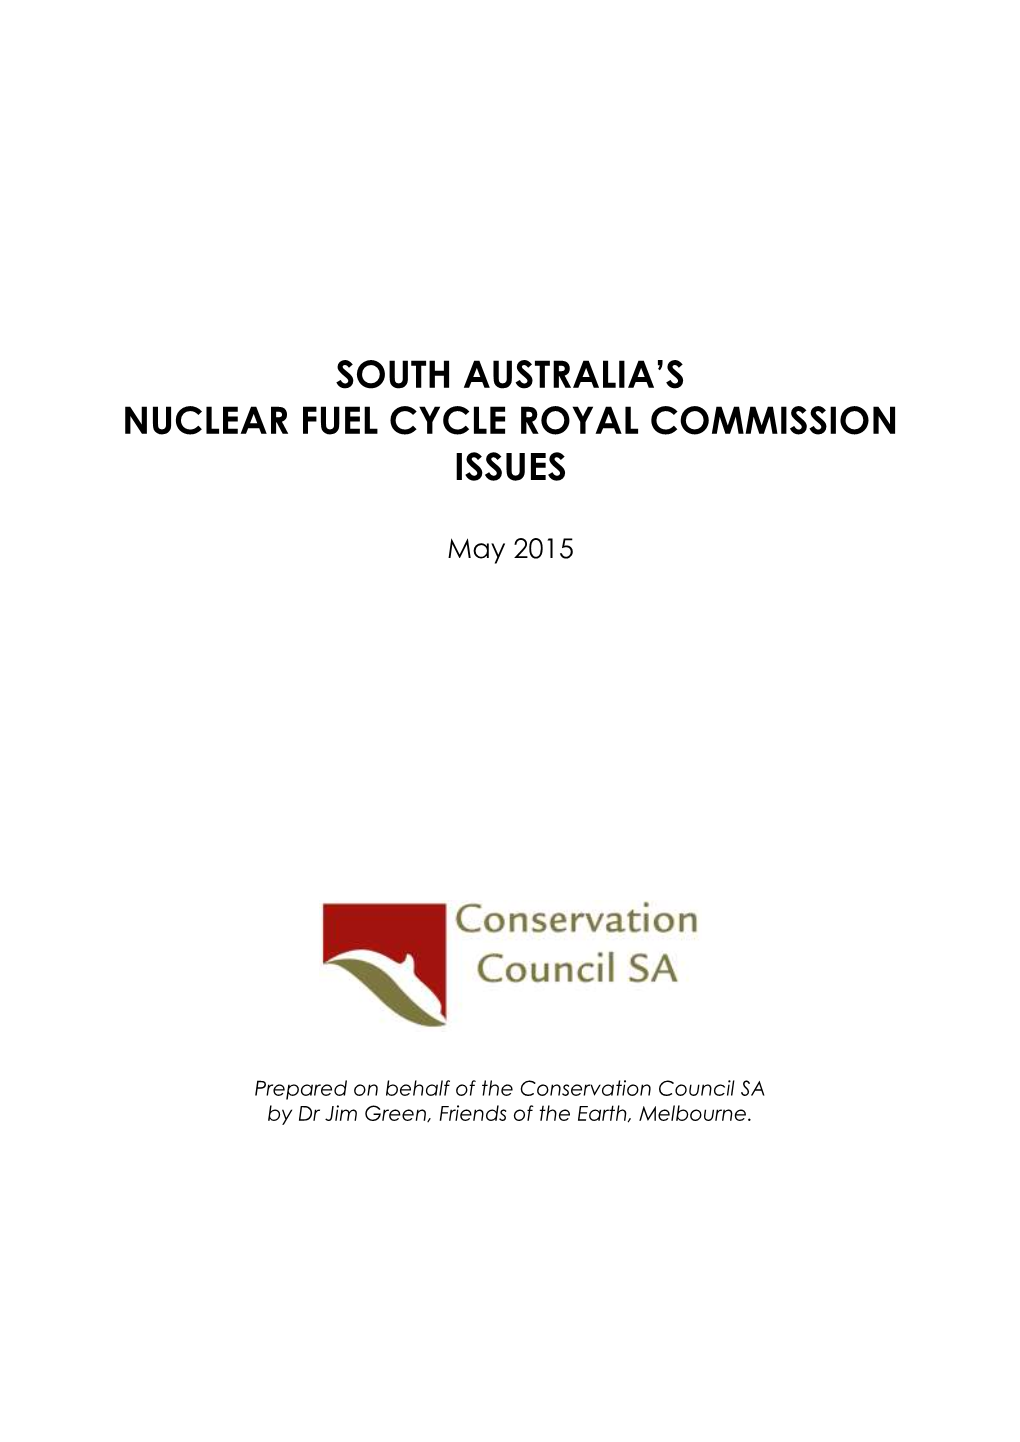 South Australia's Nuclear Fuel Cycle Royal